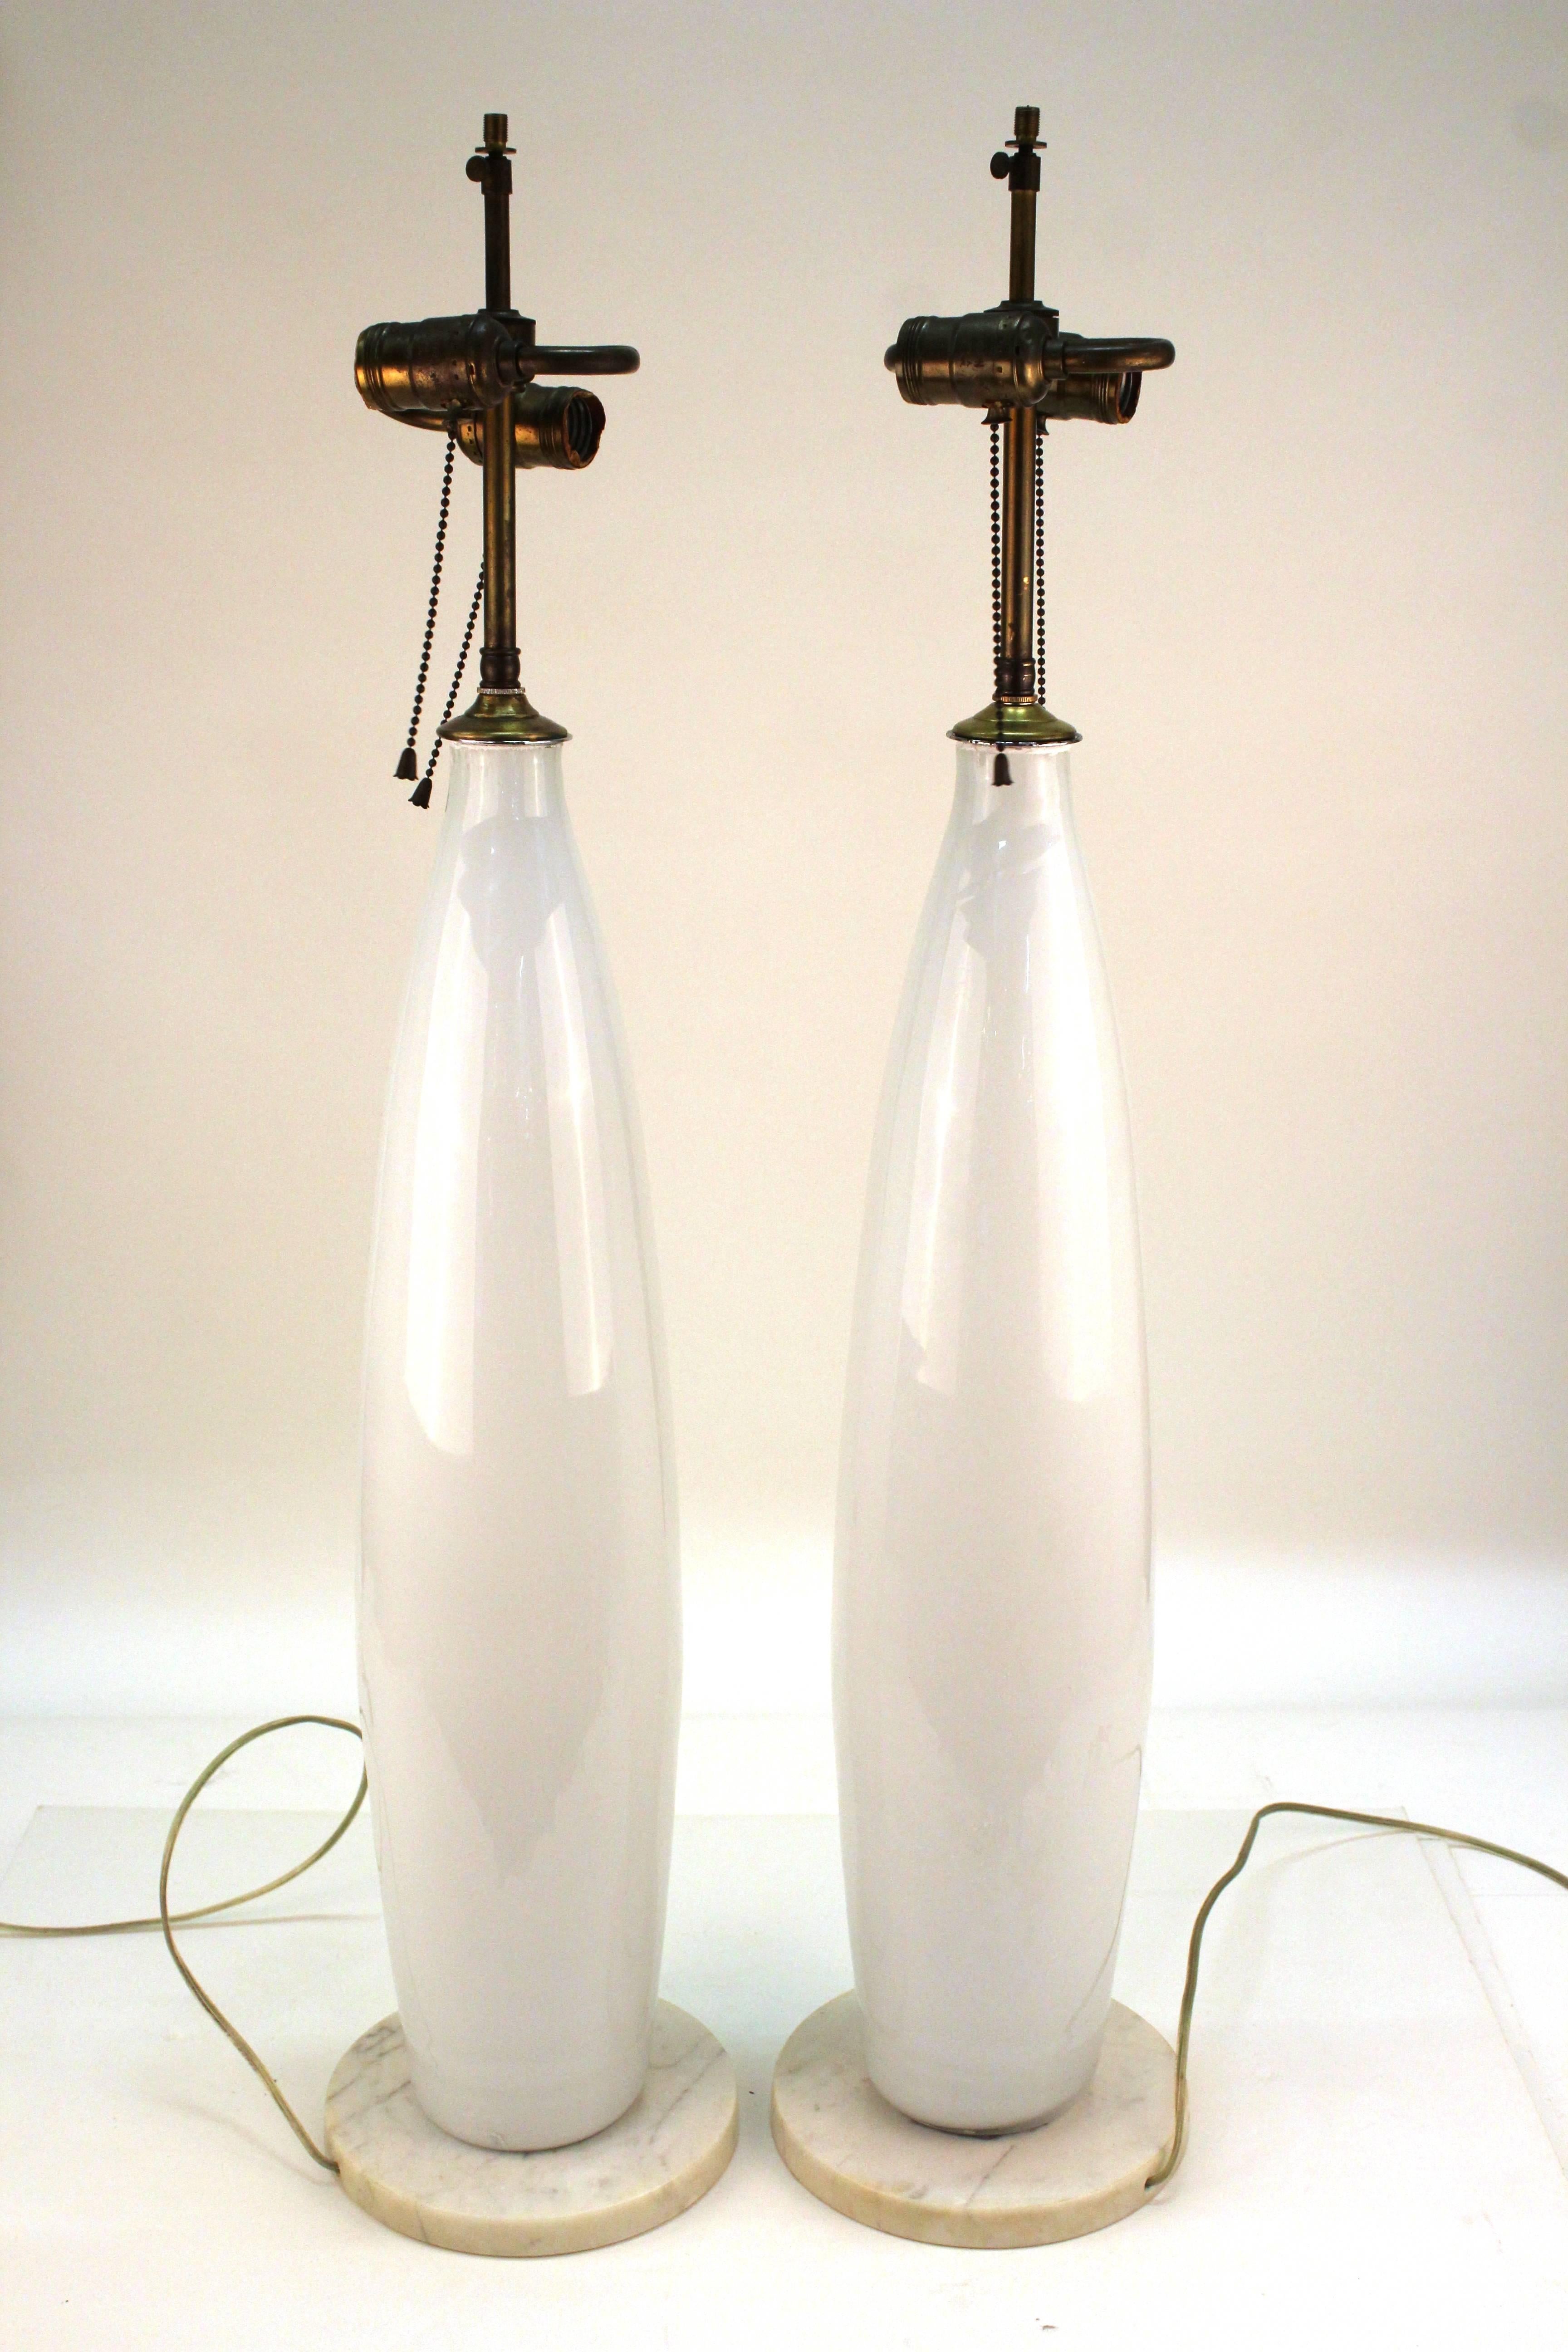 Venetian Balboa glass pair of tall table lamps in white glass atop a circular white Italian marble base. The lamps are rewired and in great vintage condition. Label on glass reads 